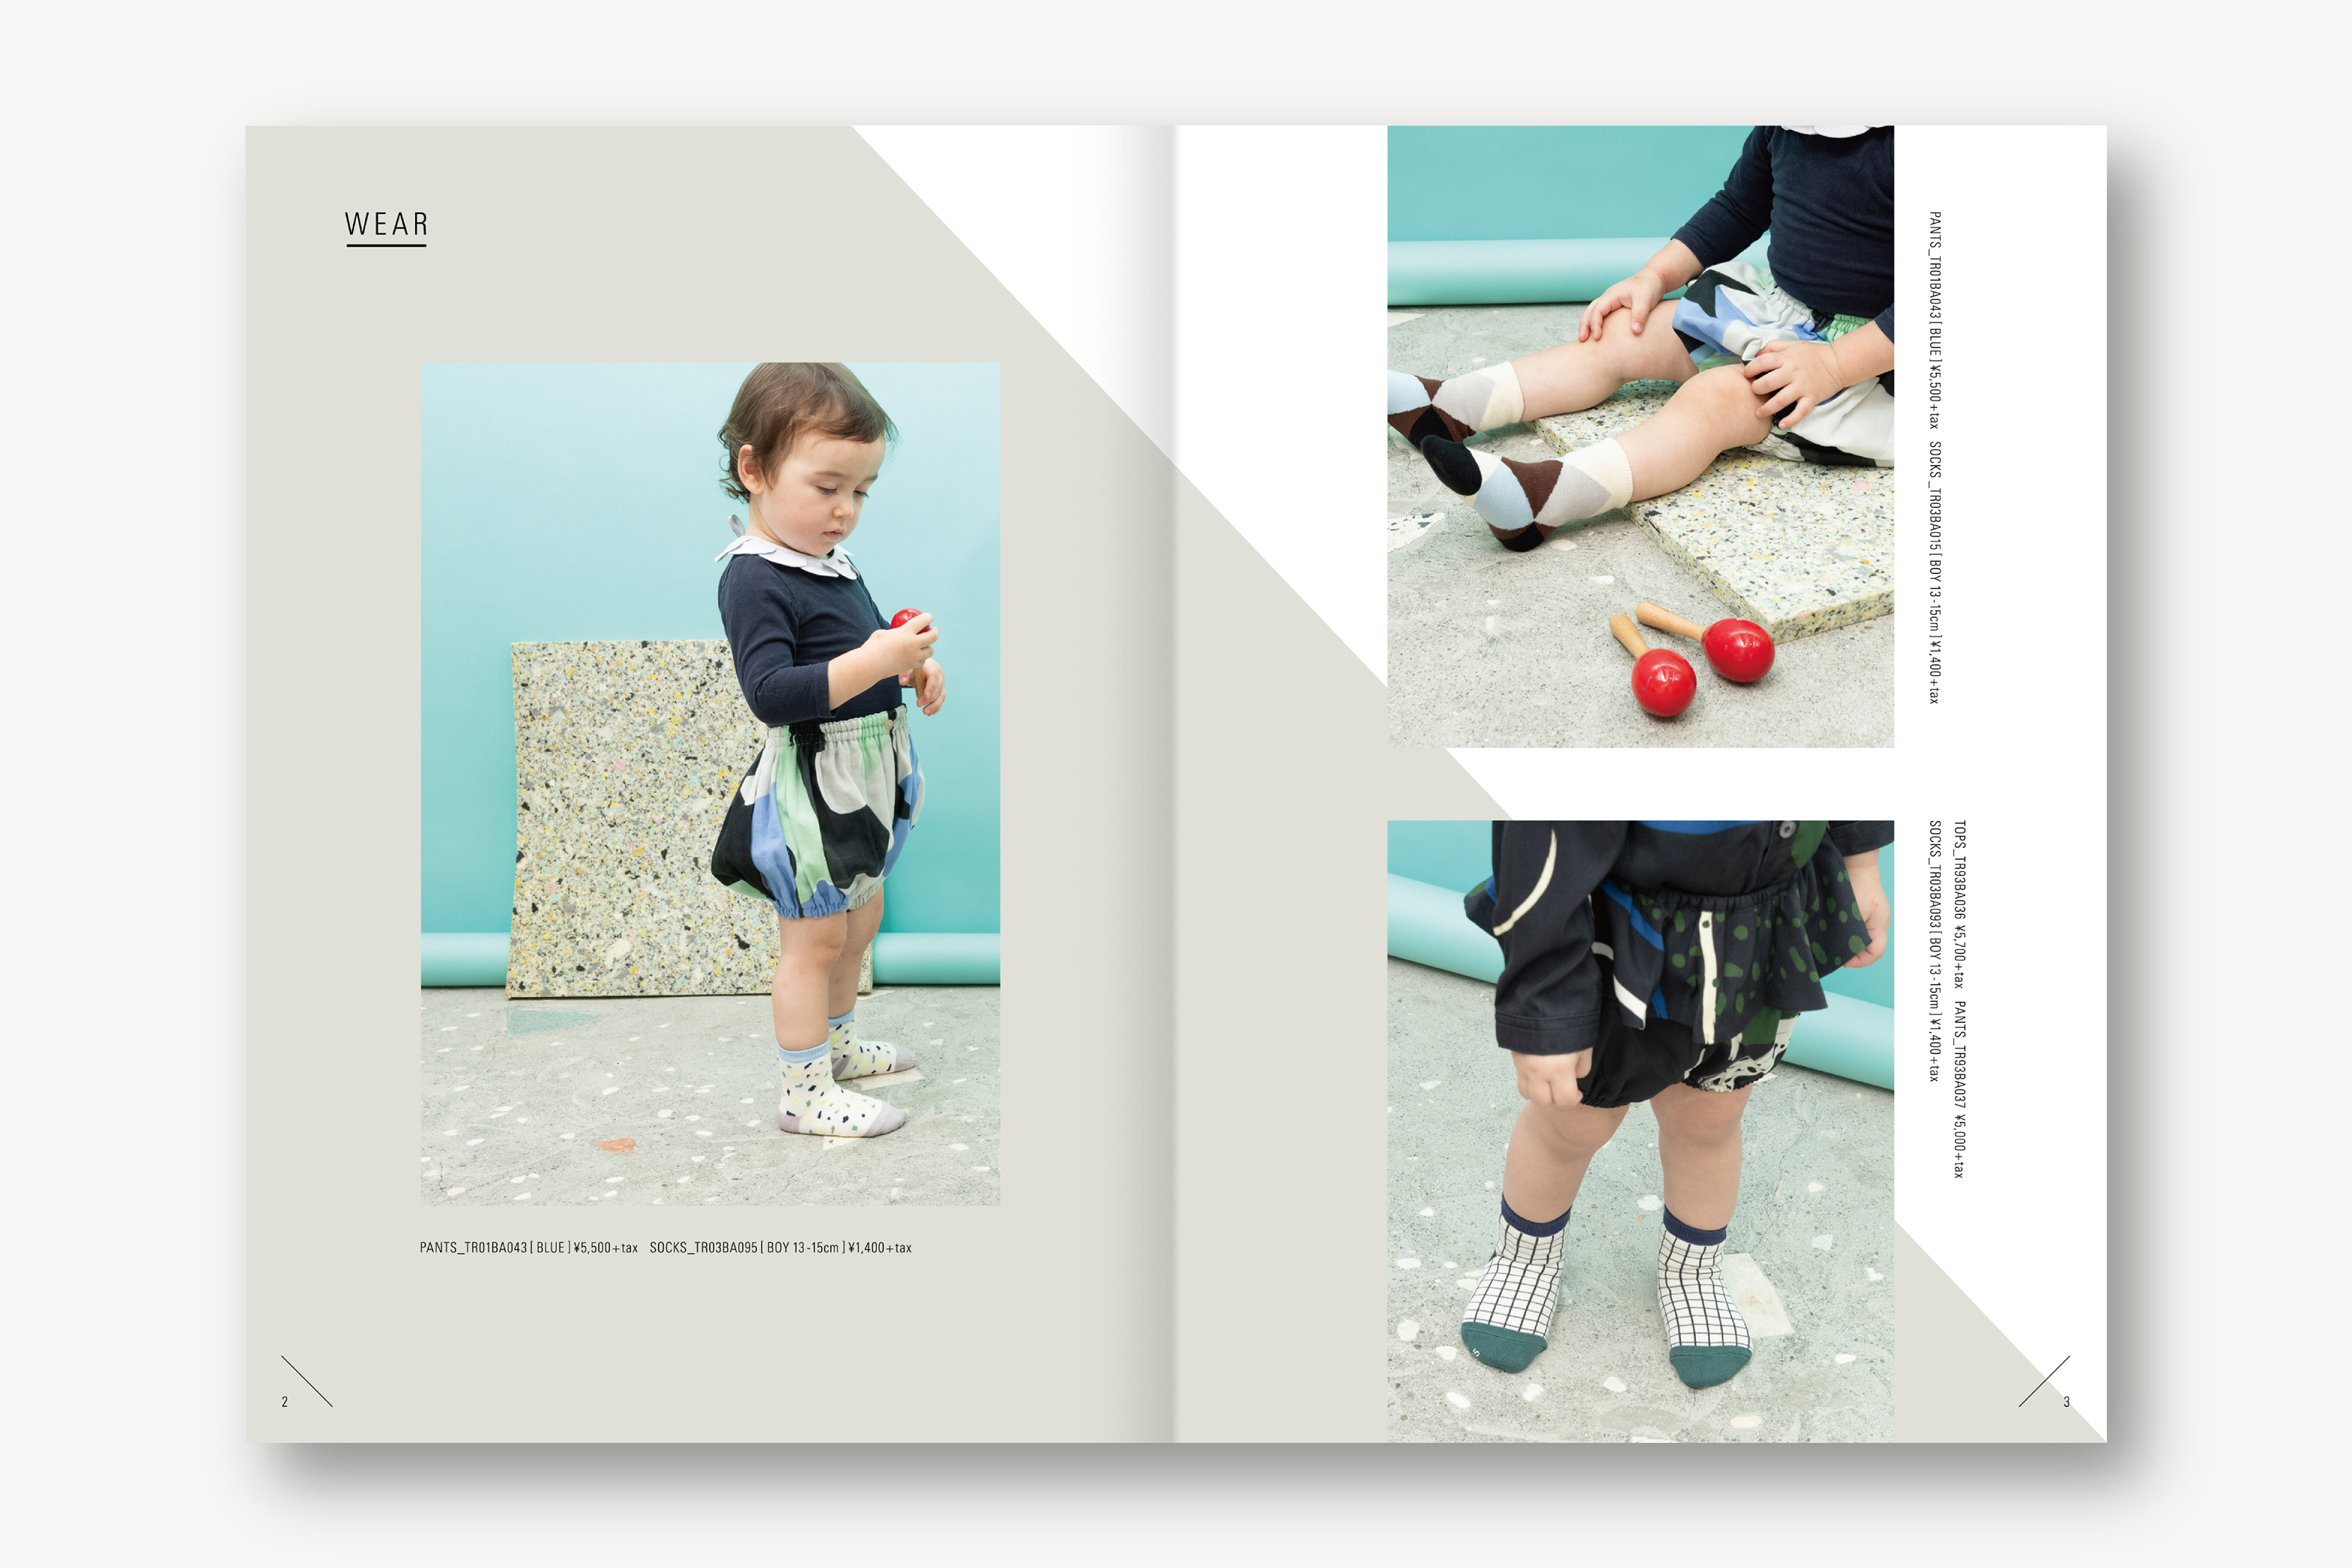 TRICOTÉ _ 2021 BABY KIDS COLLECTION LOOK BOOK